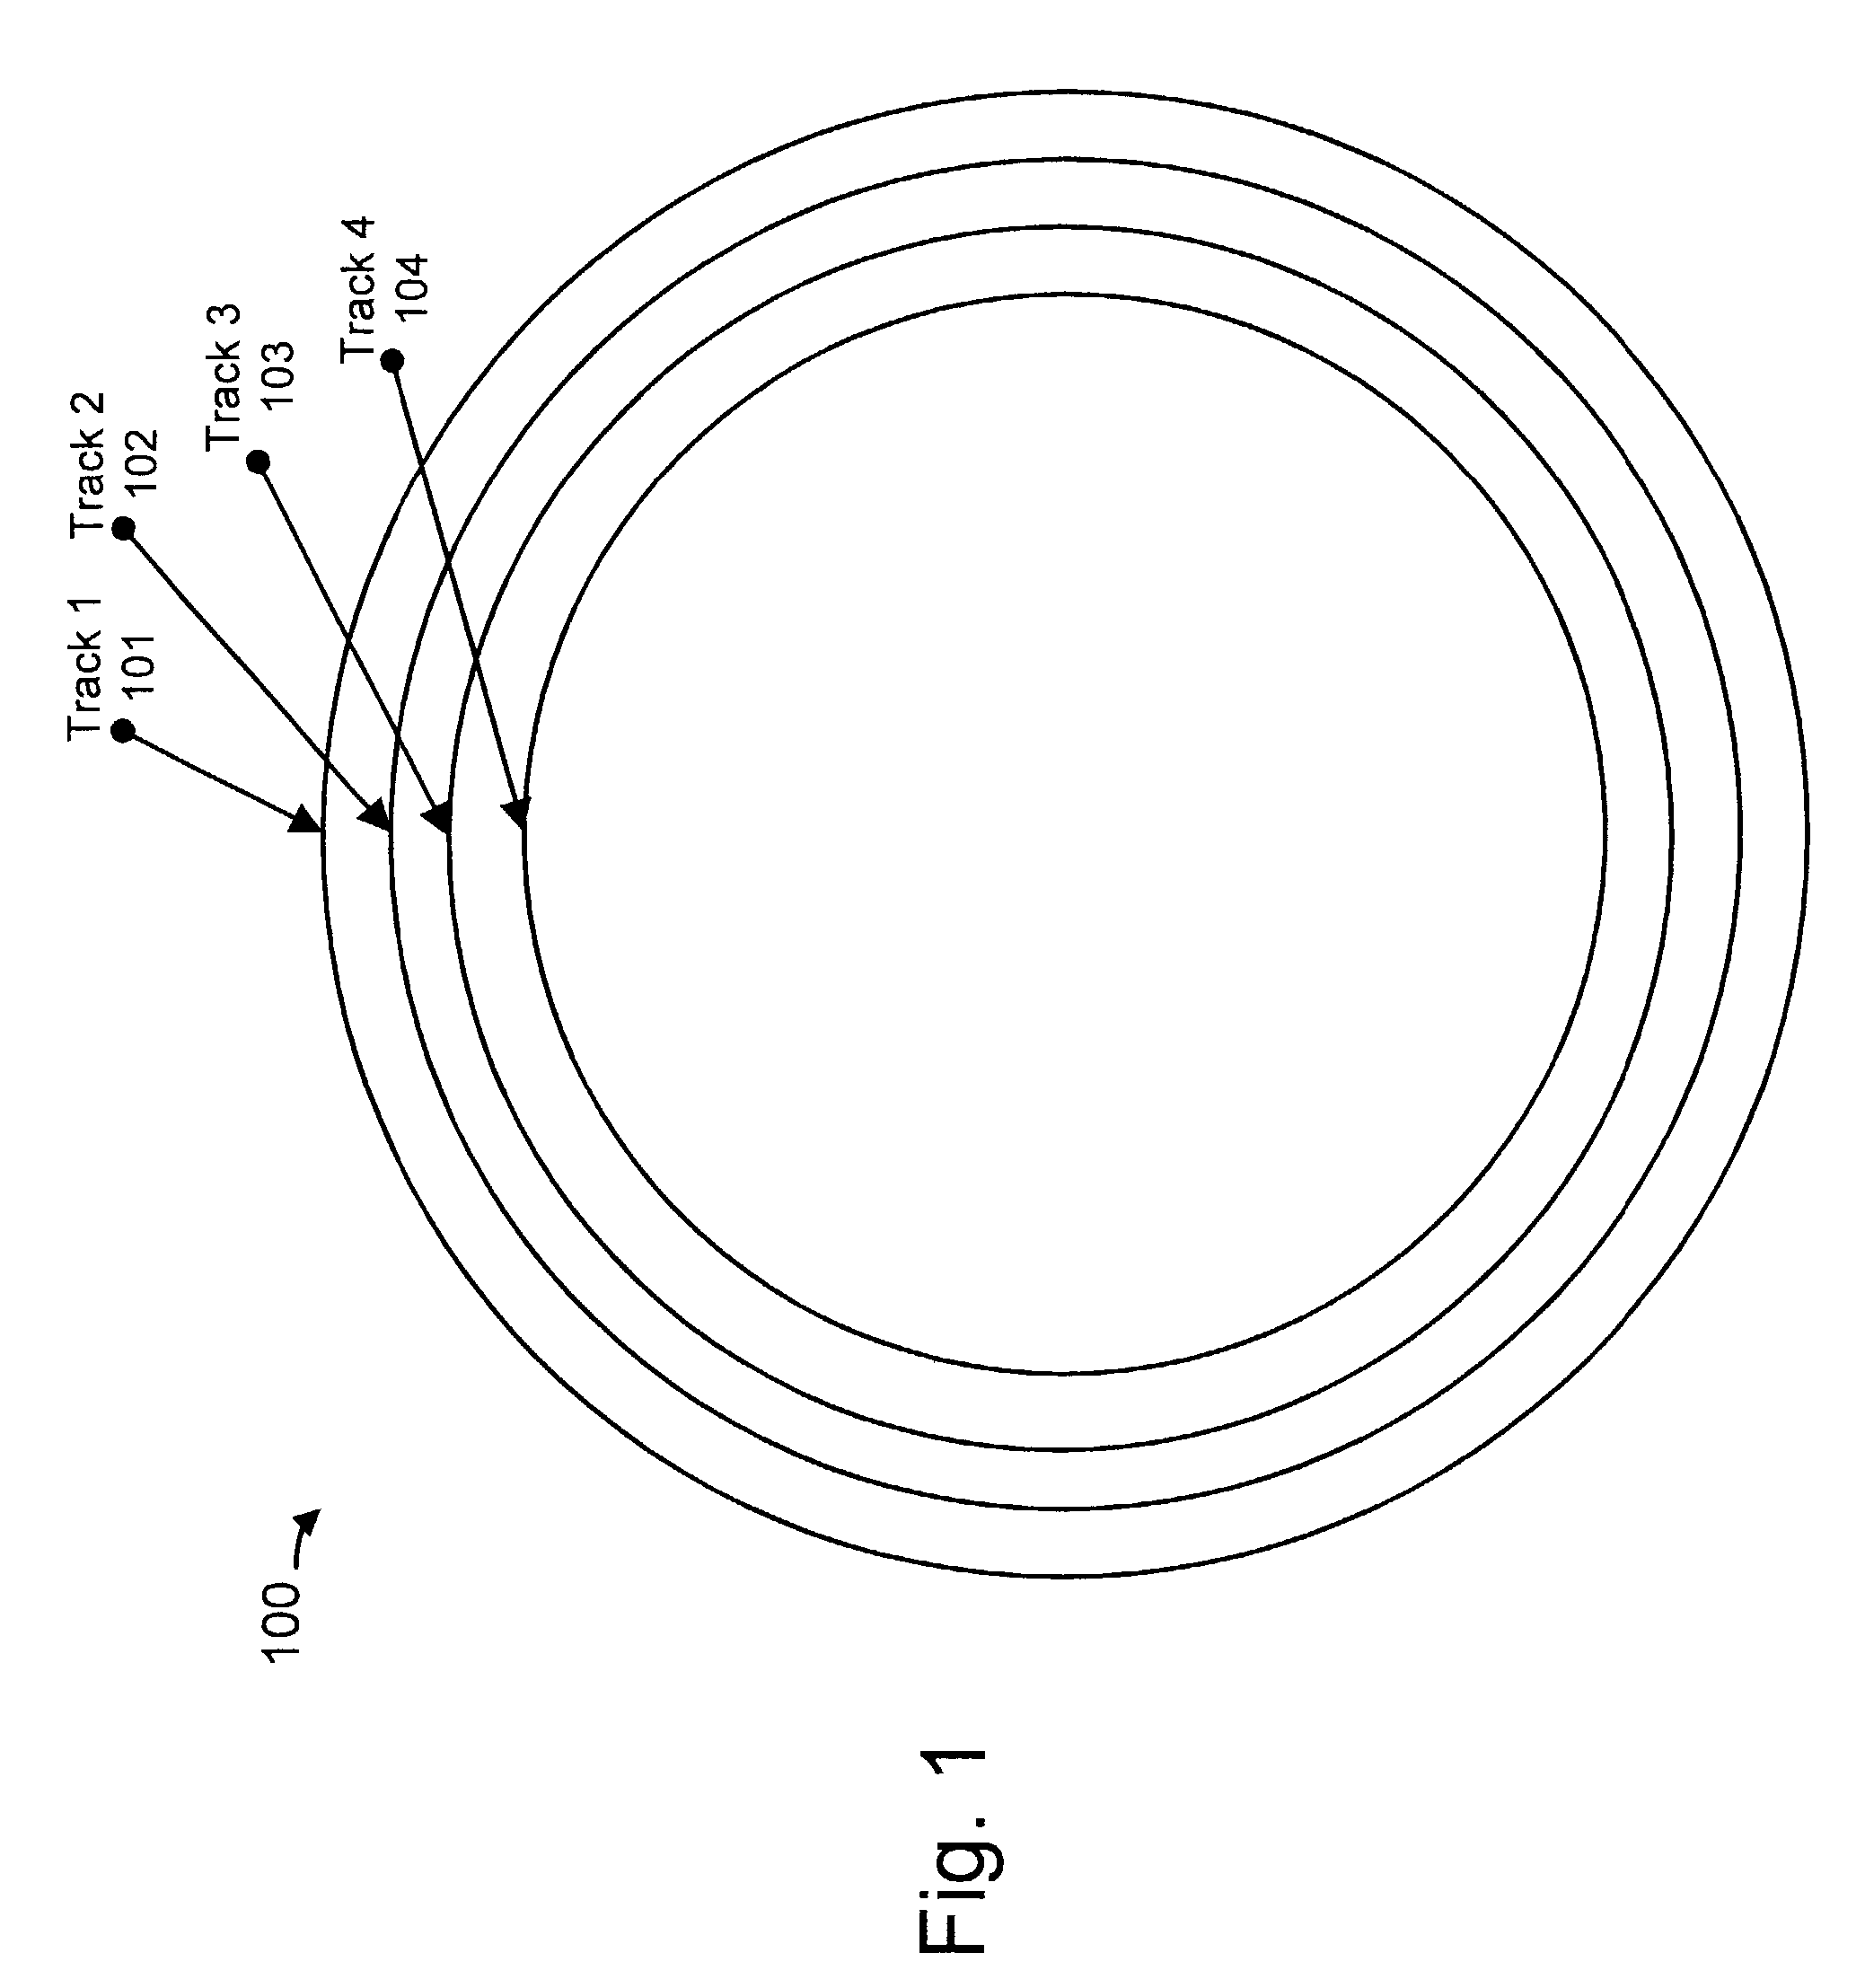 Systems and methods for removing data stored on long-term memory devices